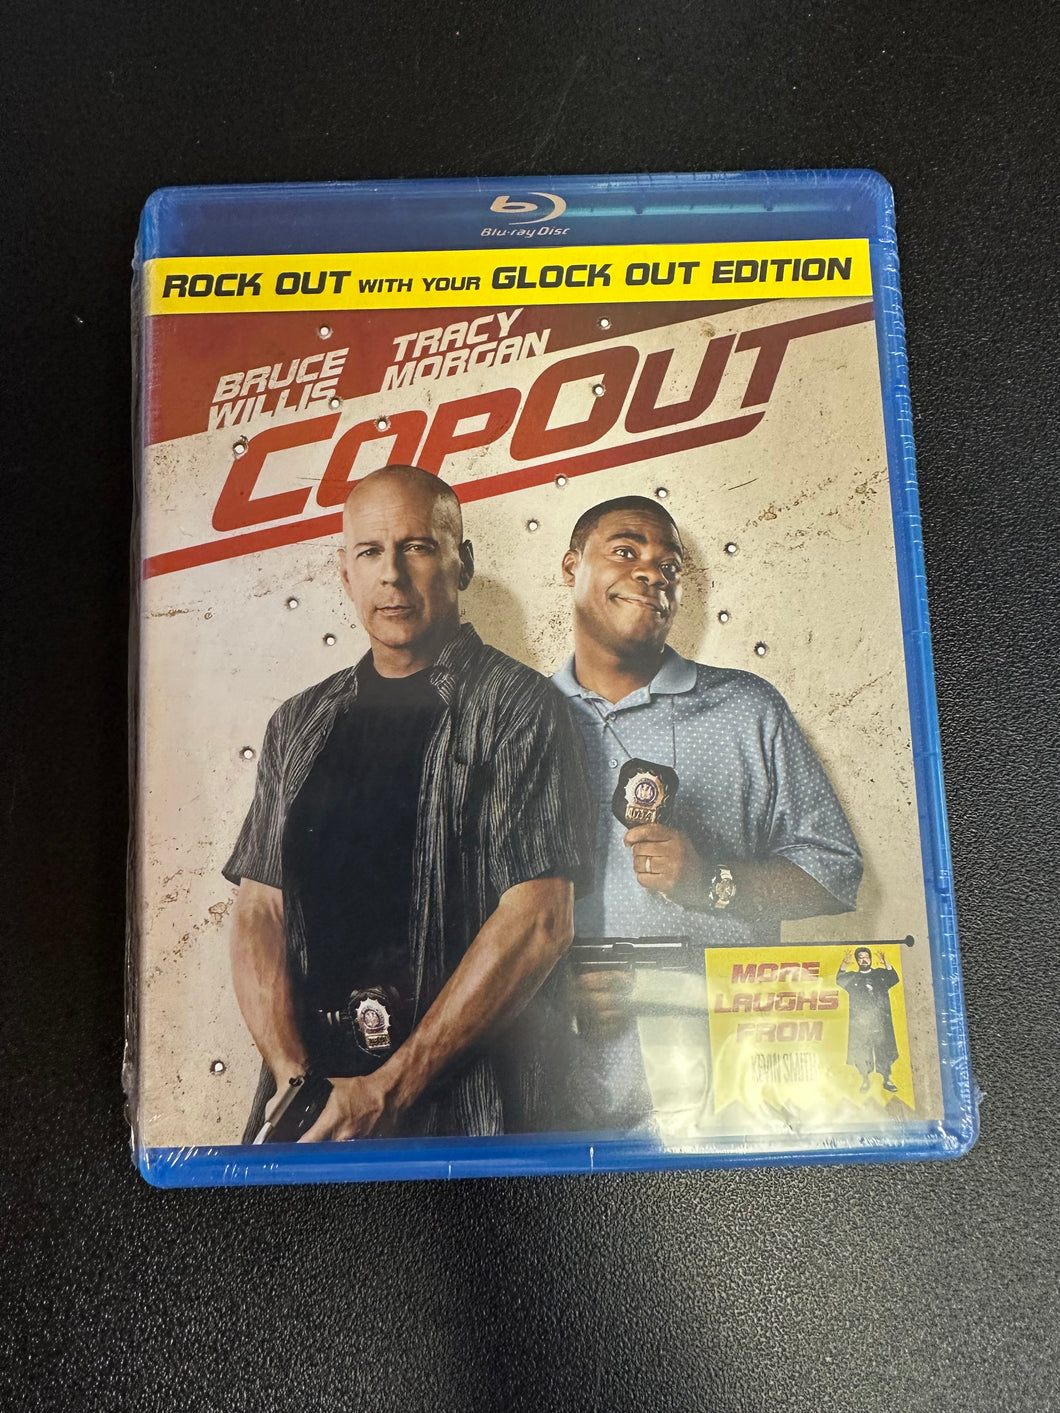 COP OUT BRUCE WILLIS TRACY MORGAN [BLU-RAY] (NEW) Sealed